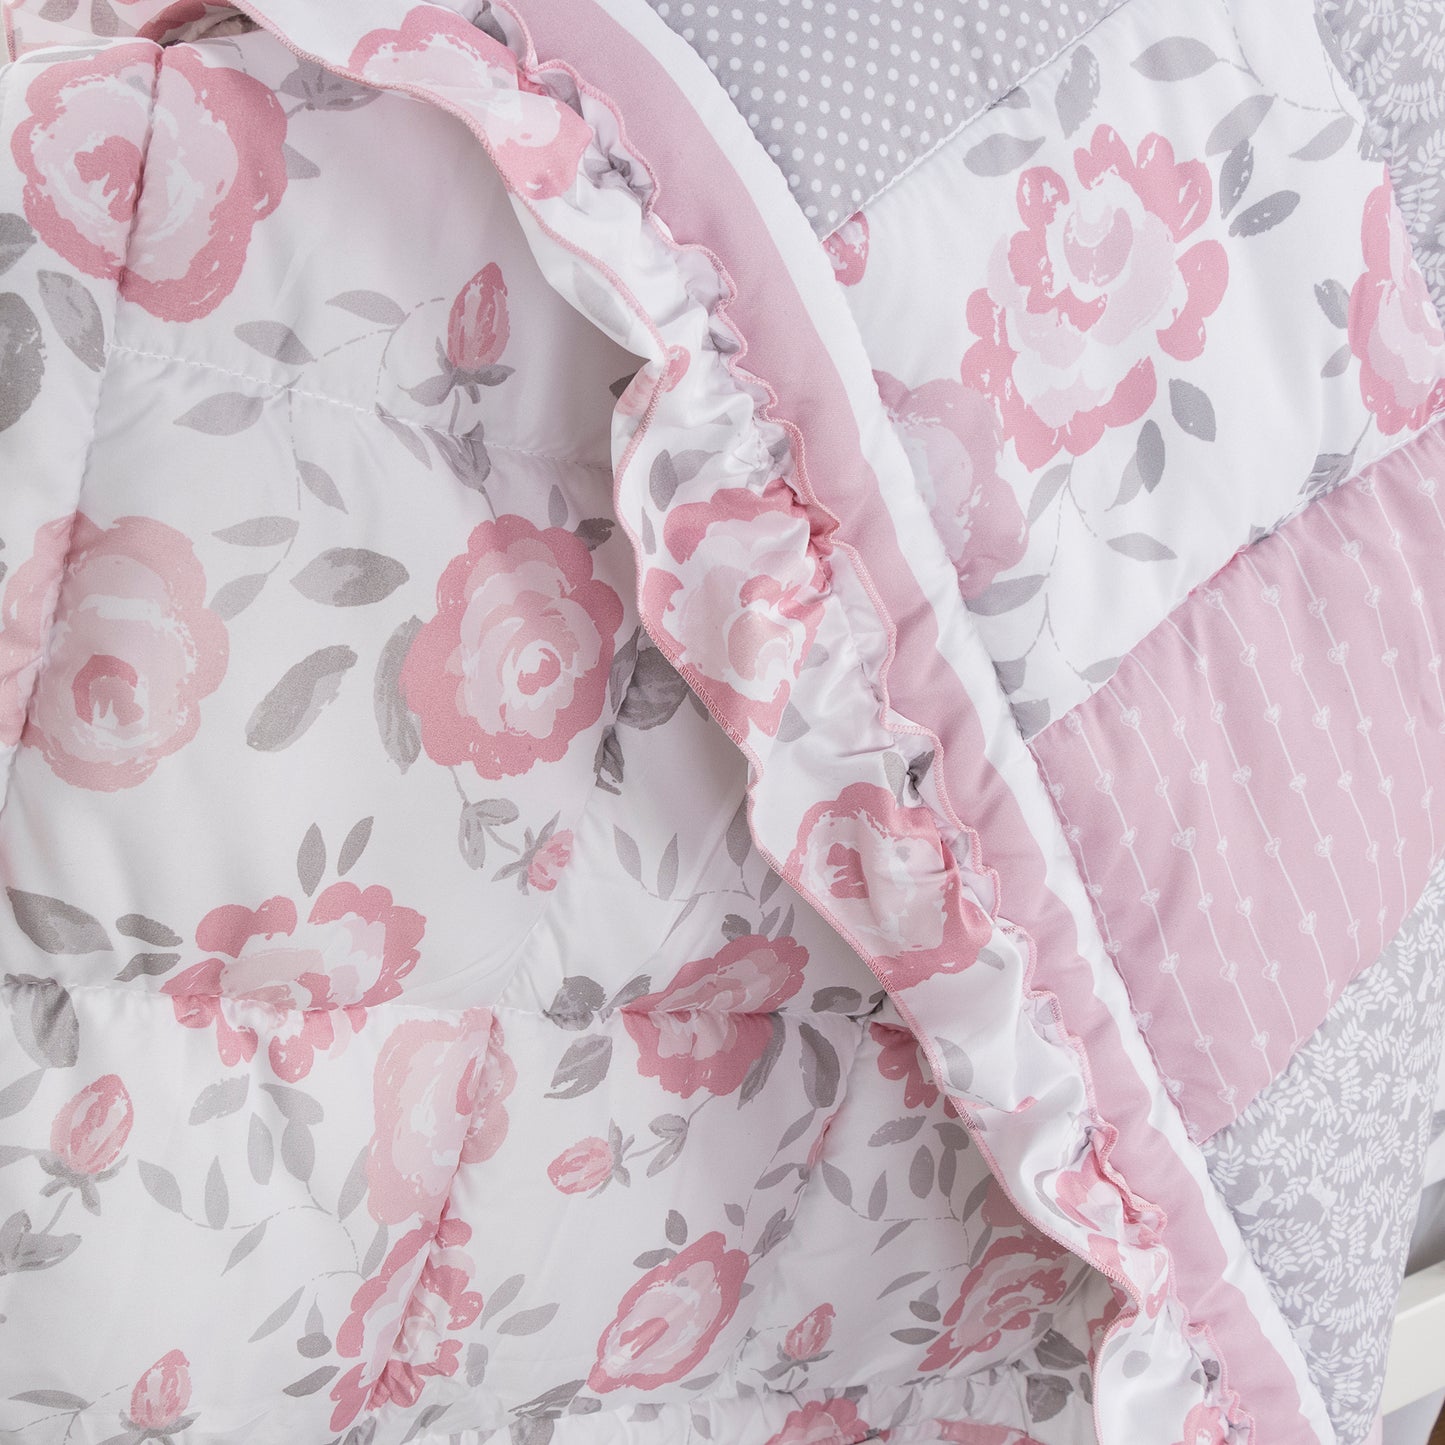 Emma 4 Piece Crib Bedding Collection by Sammy and Lou; stylized fabric details of nursery quilt